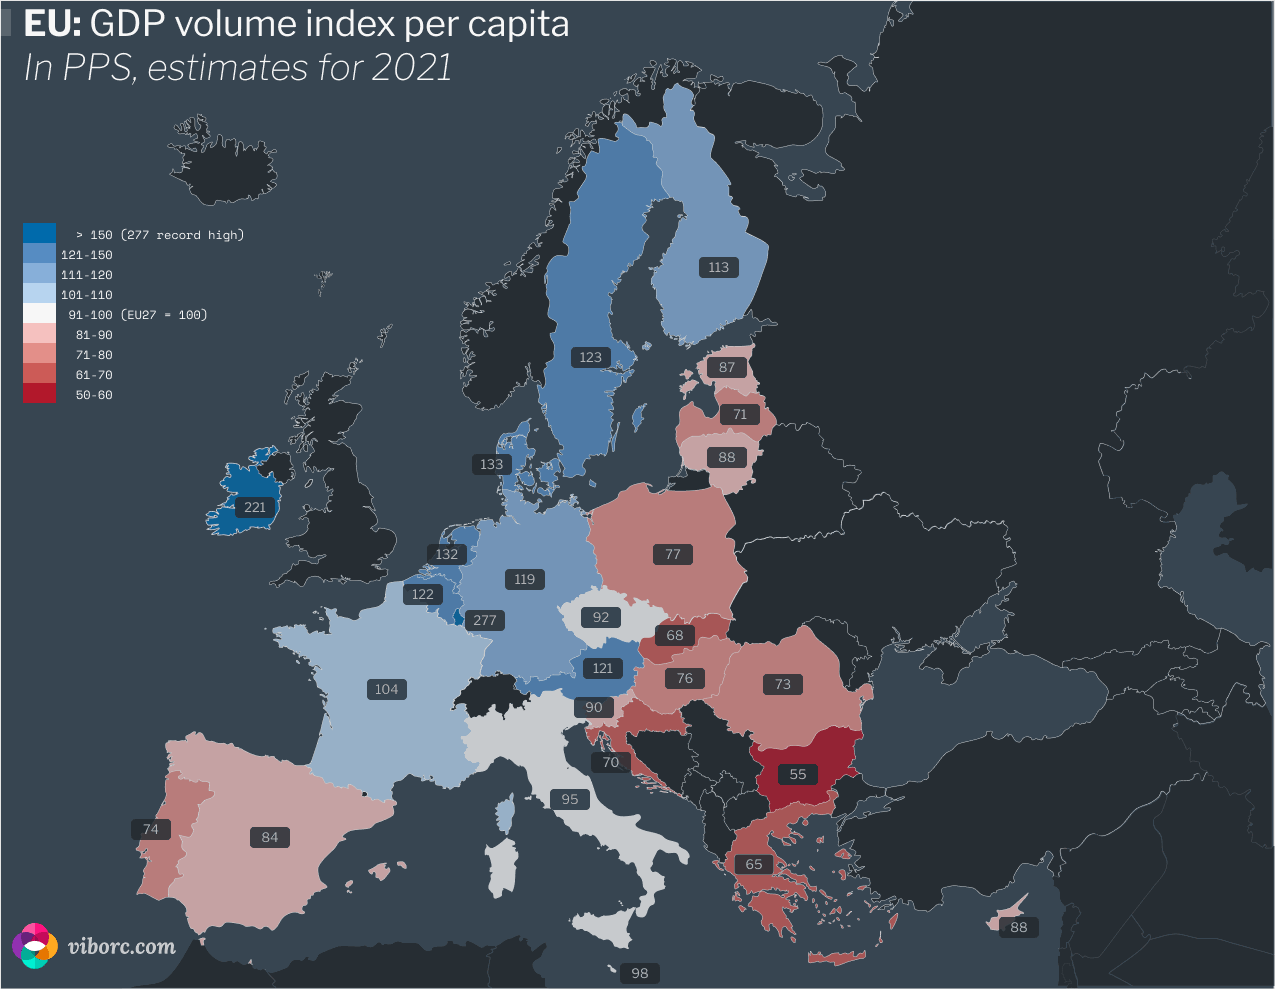 Monarch game Give rights Europe's GDP per capita expressed in PPS for 2021 • viborc.com